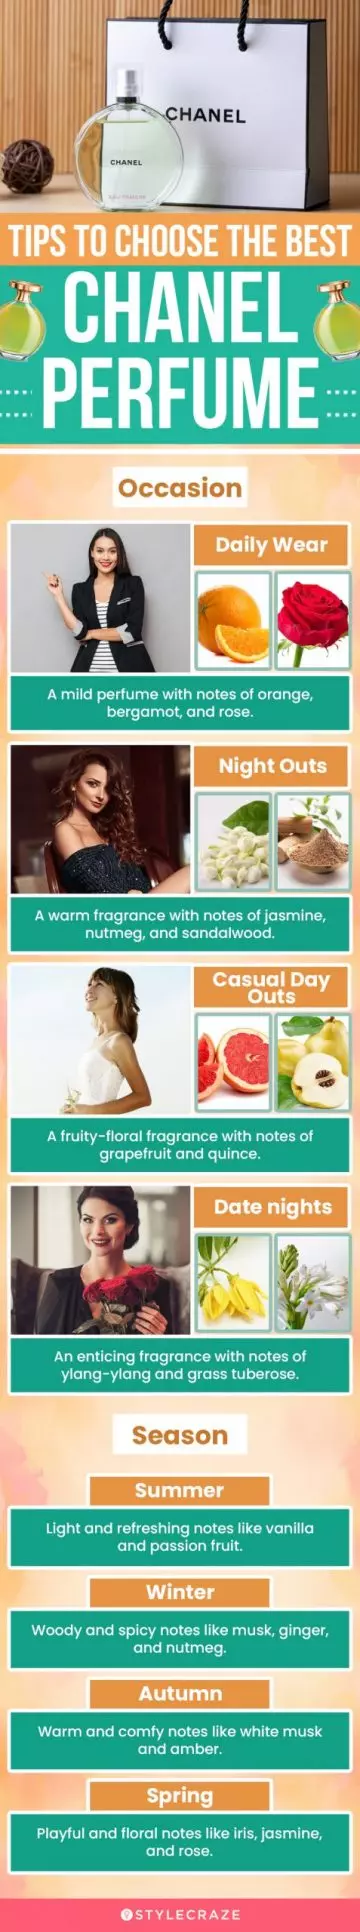 Tips To Choose The Best Chanel Perfume(infographic)